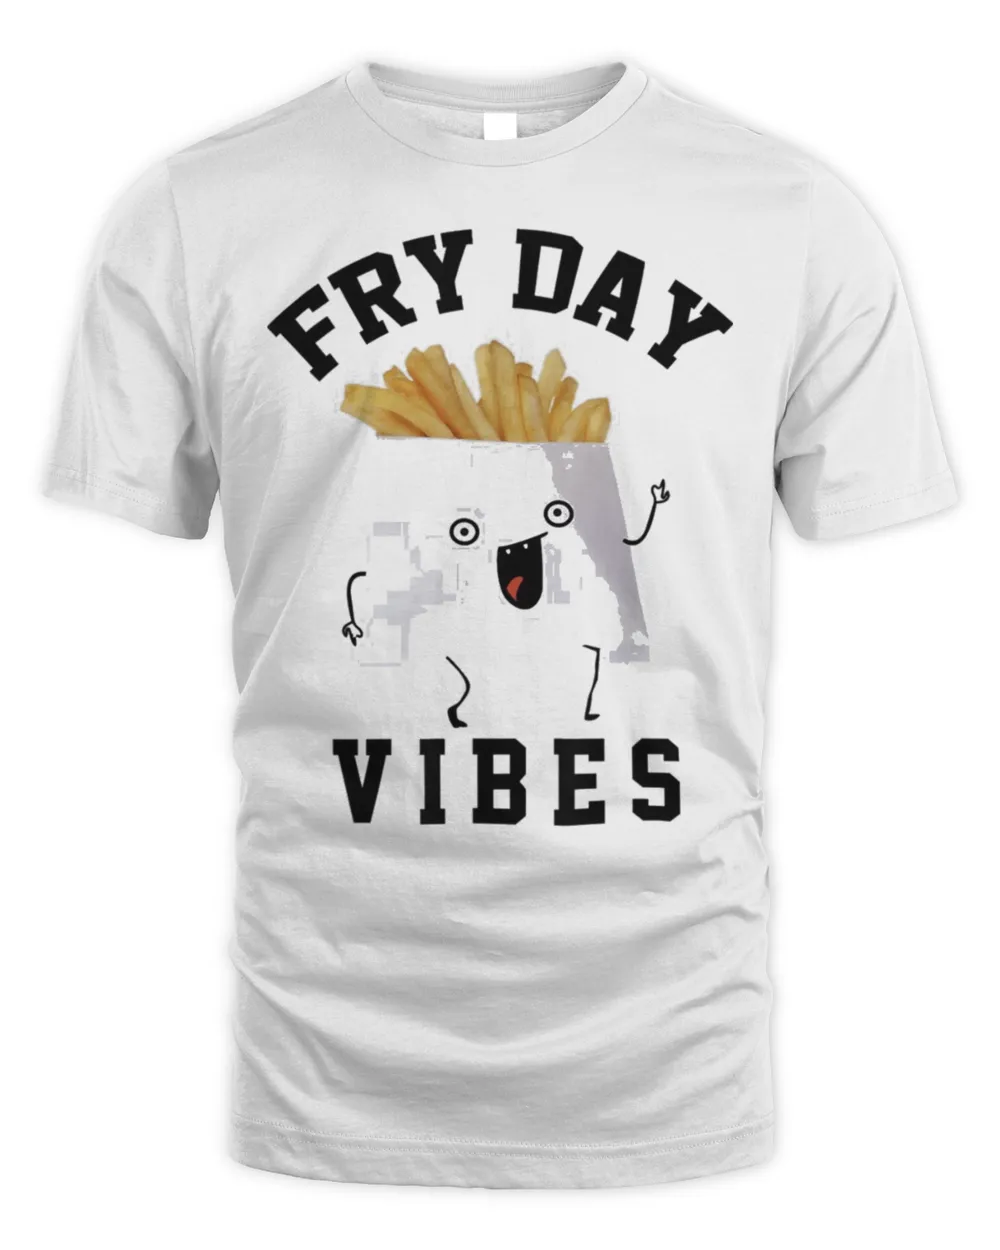 Funny Fry Day Vibes Shirt